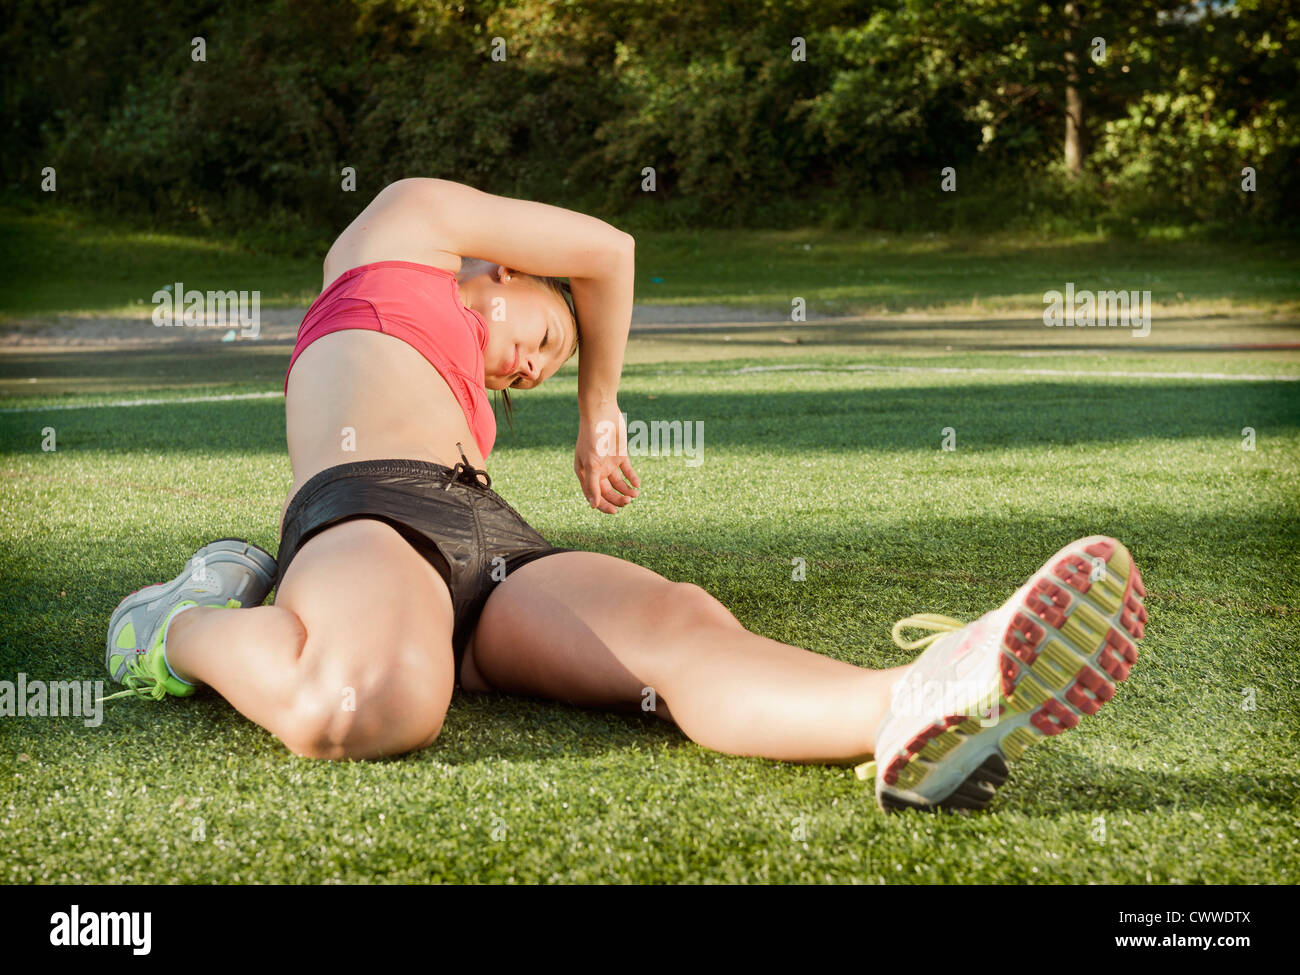 Runner stretching on grass in park Stock Photo